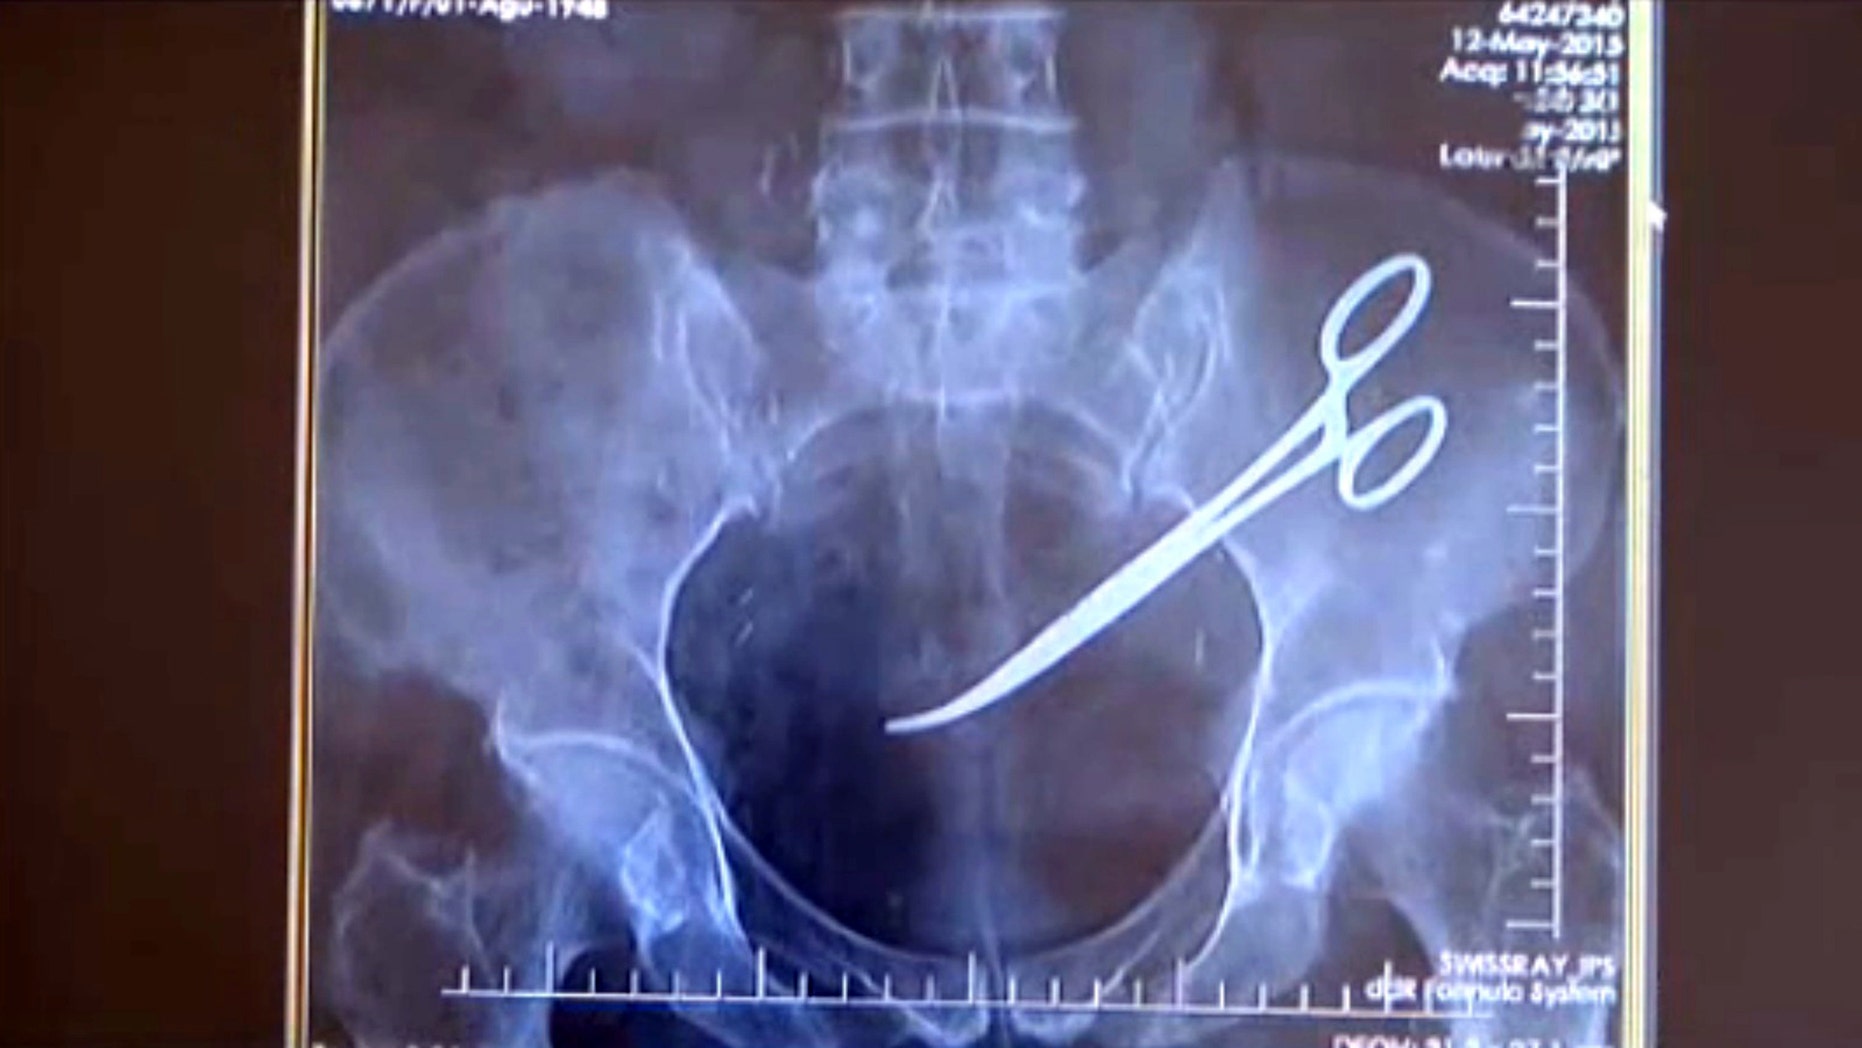 Woman Suing After Doctors Leave Surgical Scissors In Abdomen Fox News